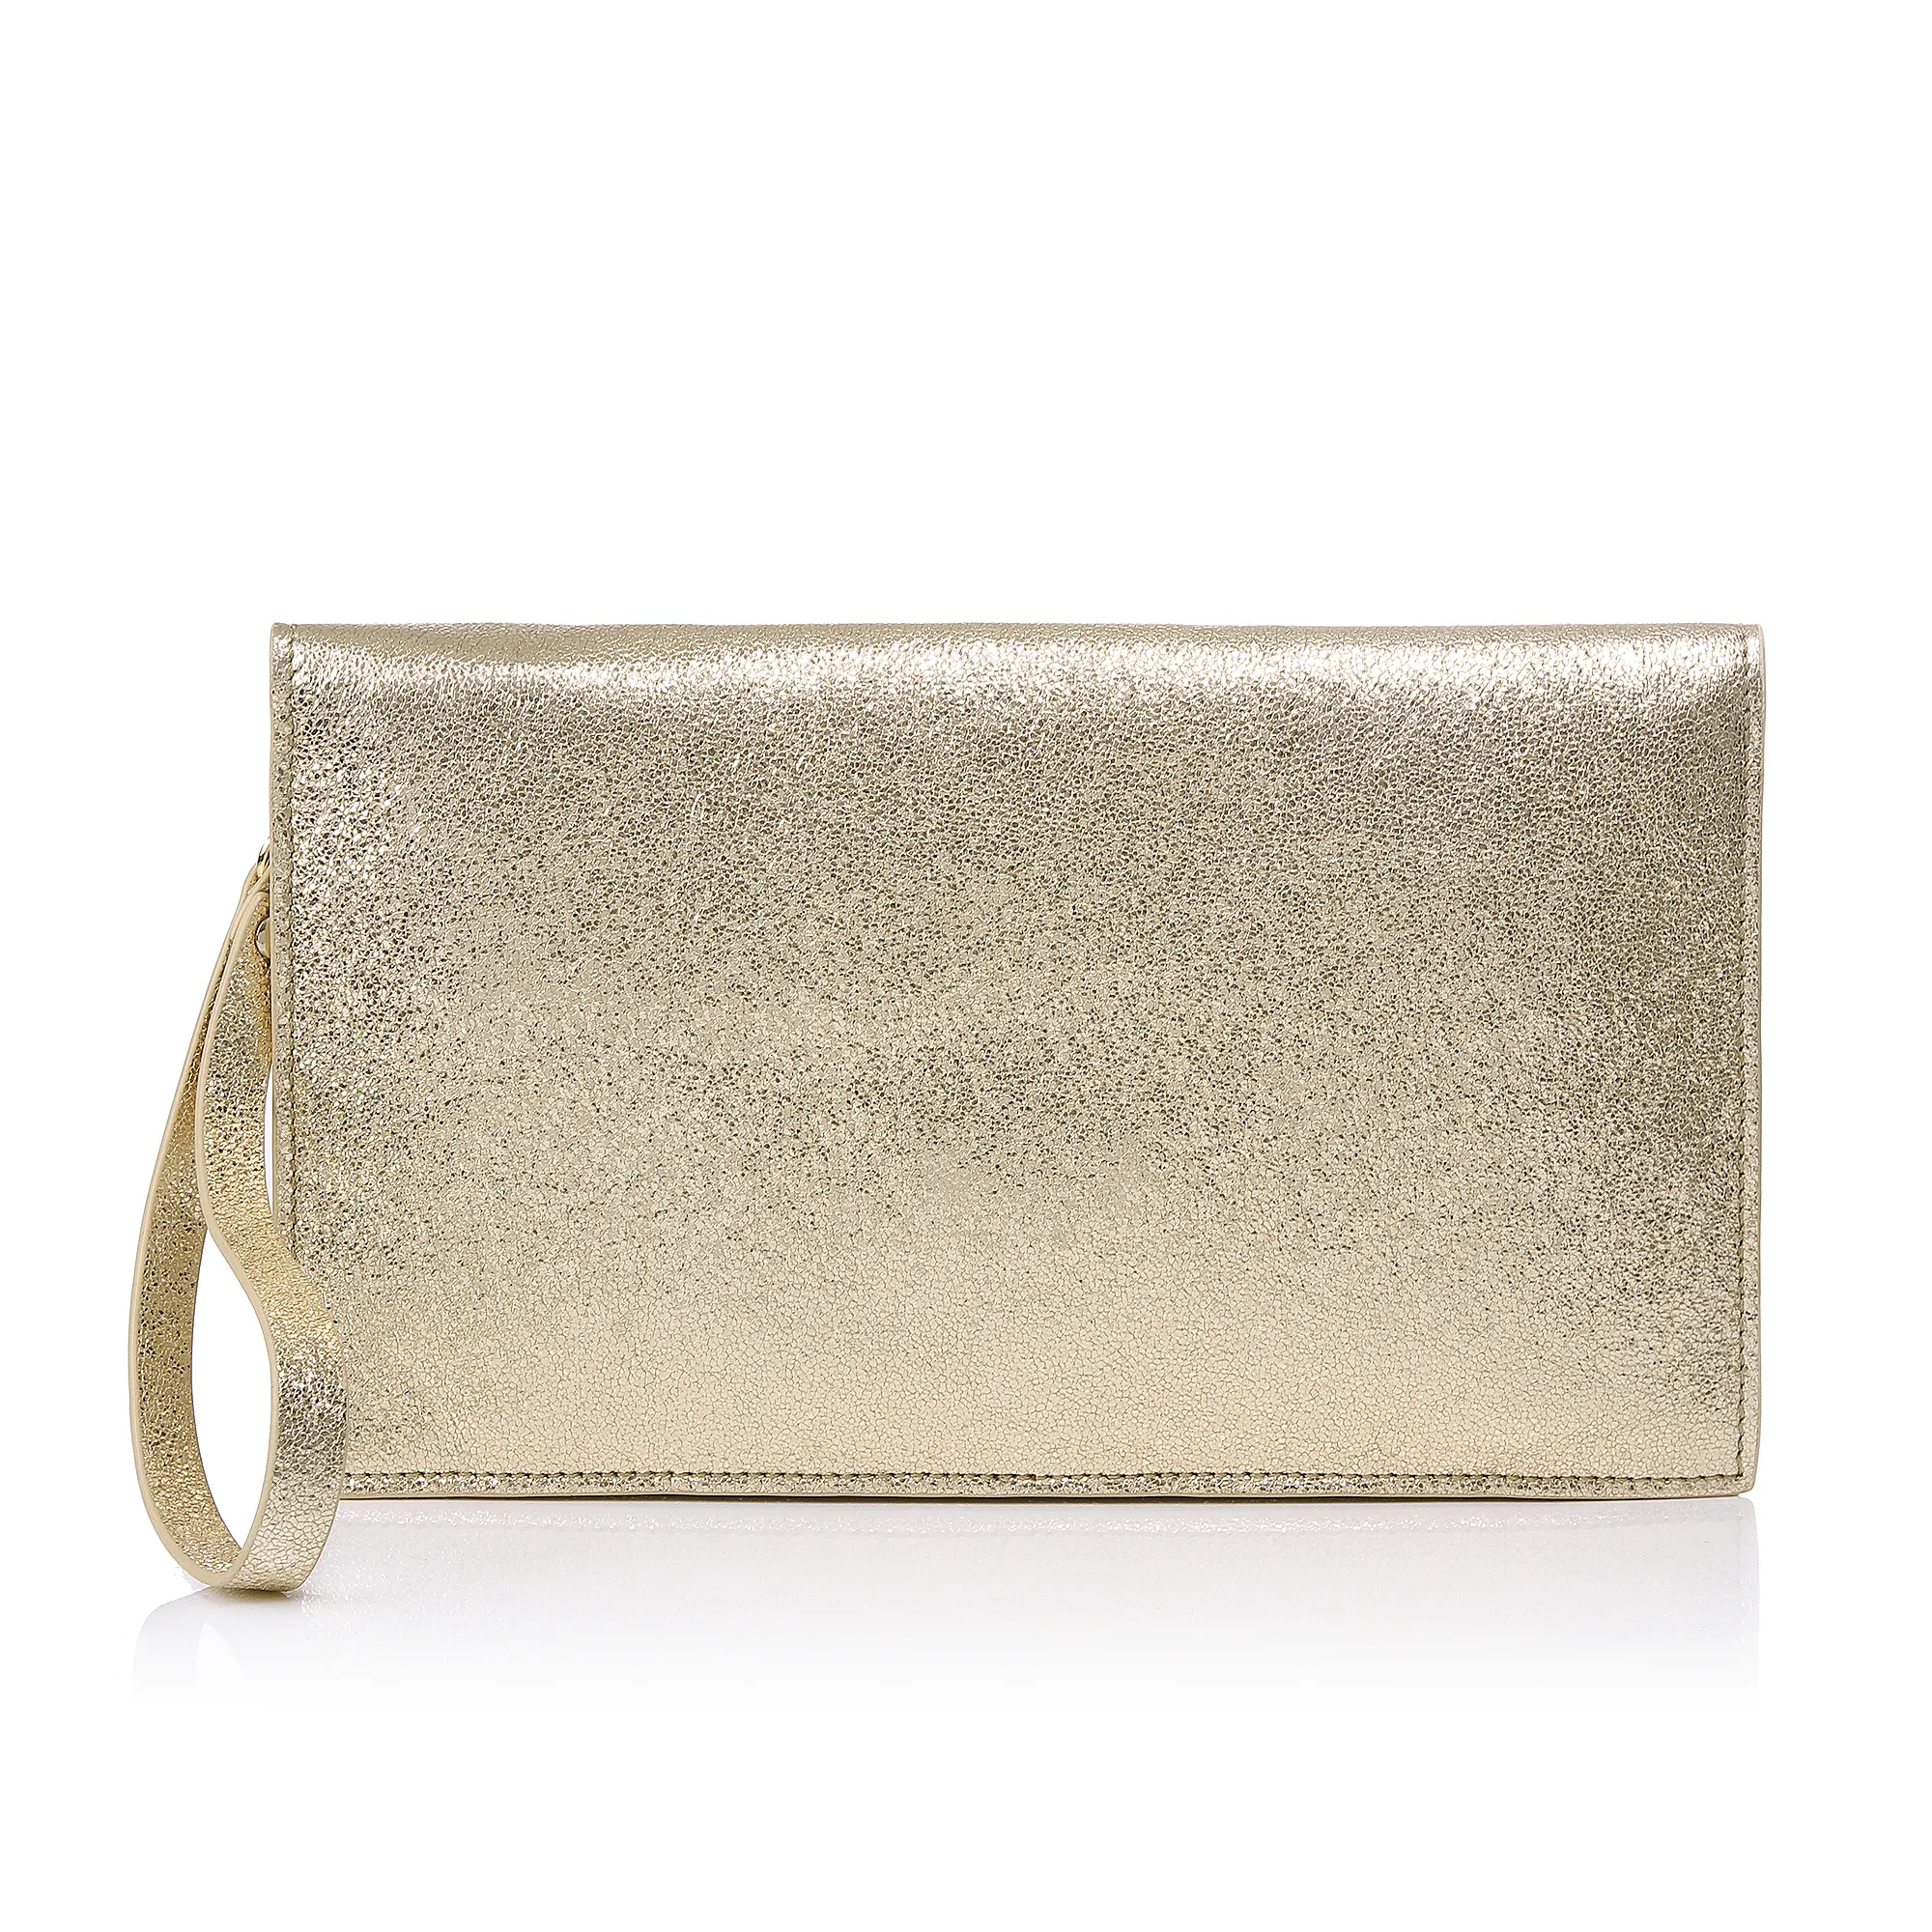 2021 Luxury Clutch Bag Metallic Genuine Leather Evening Clutches Ladies Large Gold Dinner Bags